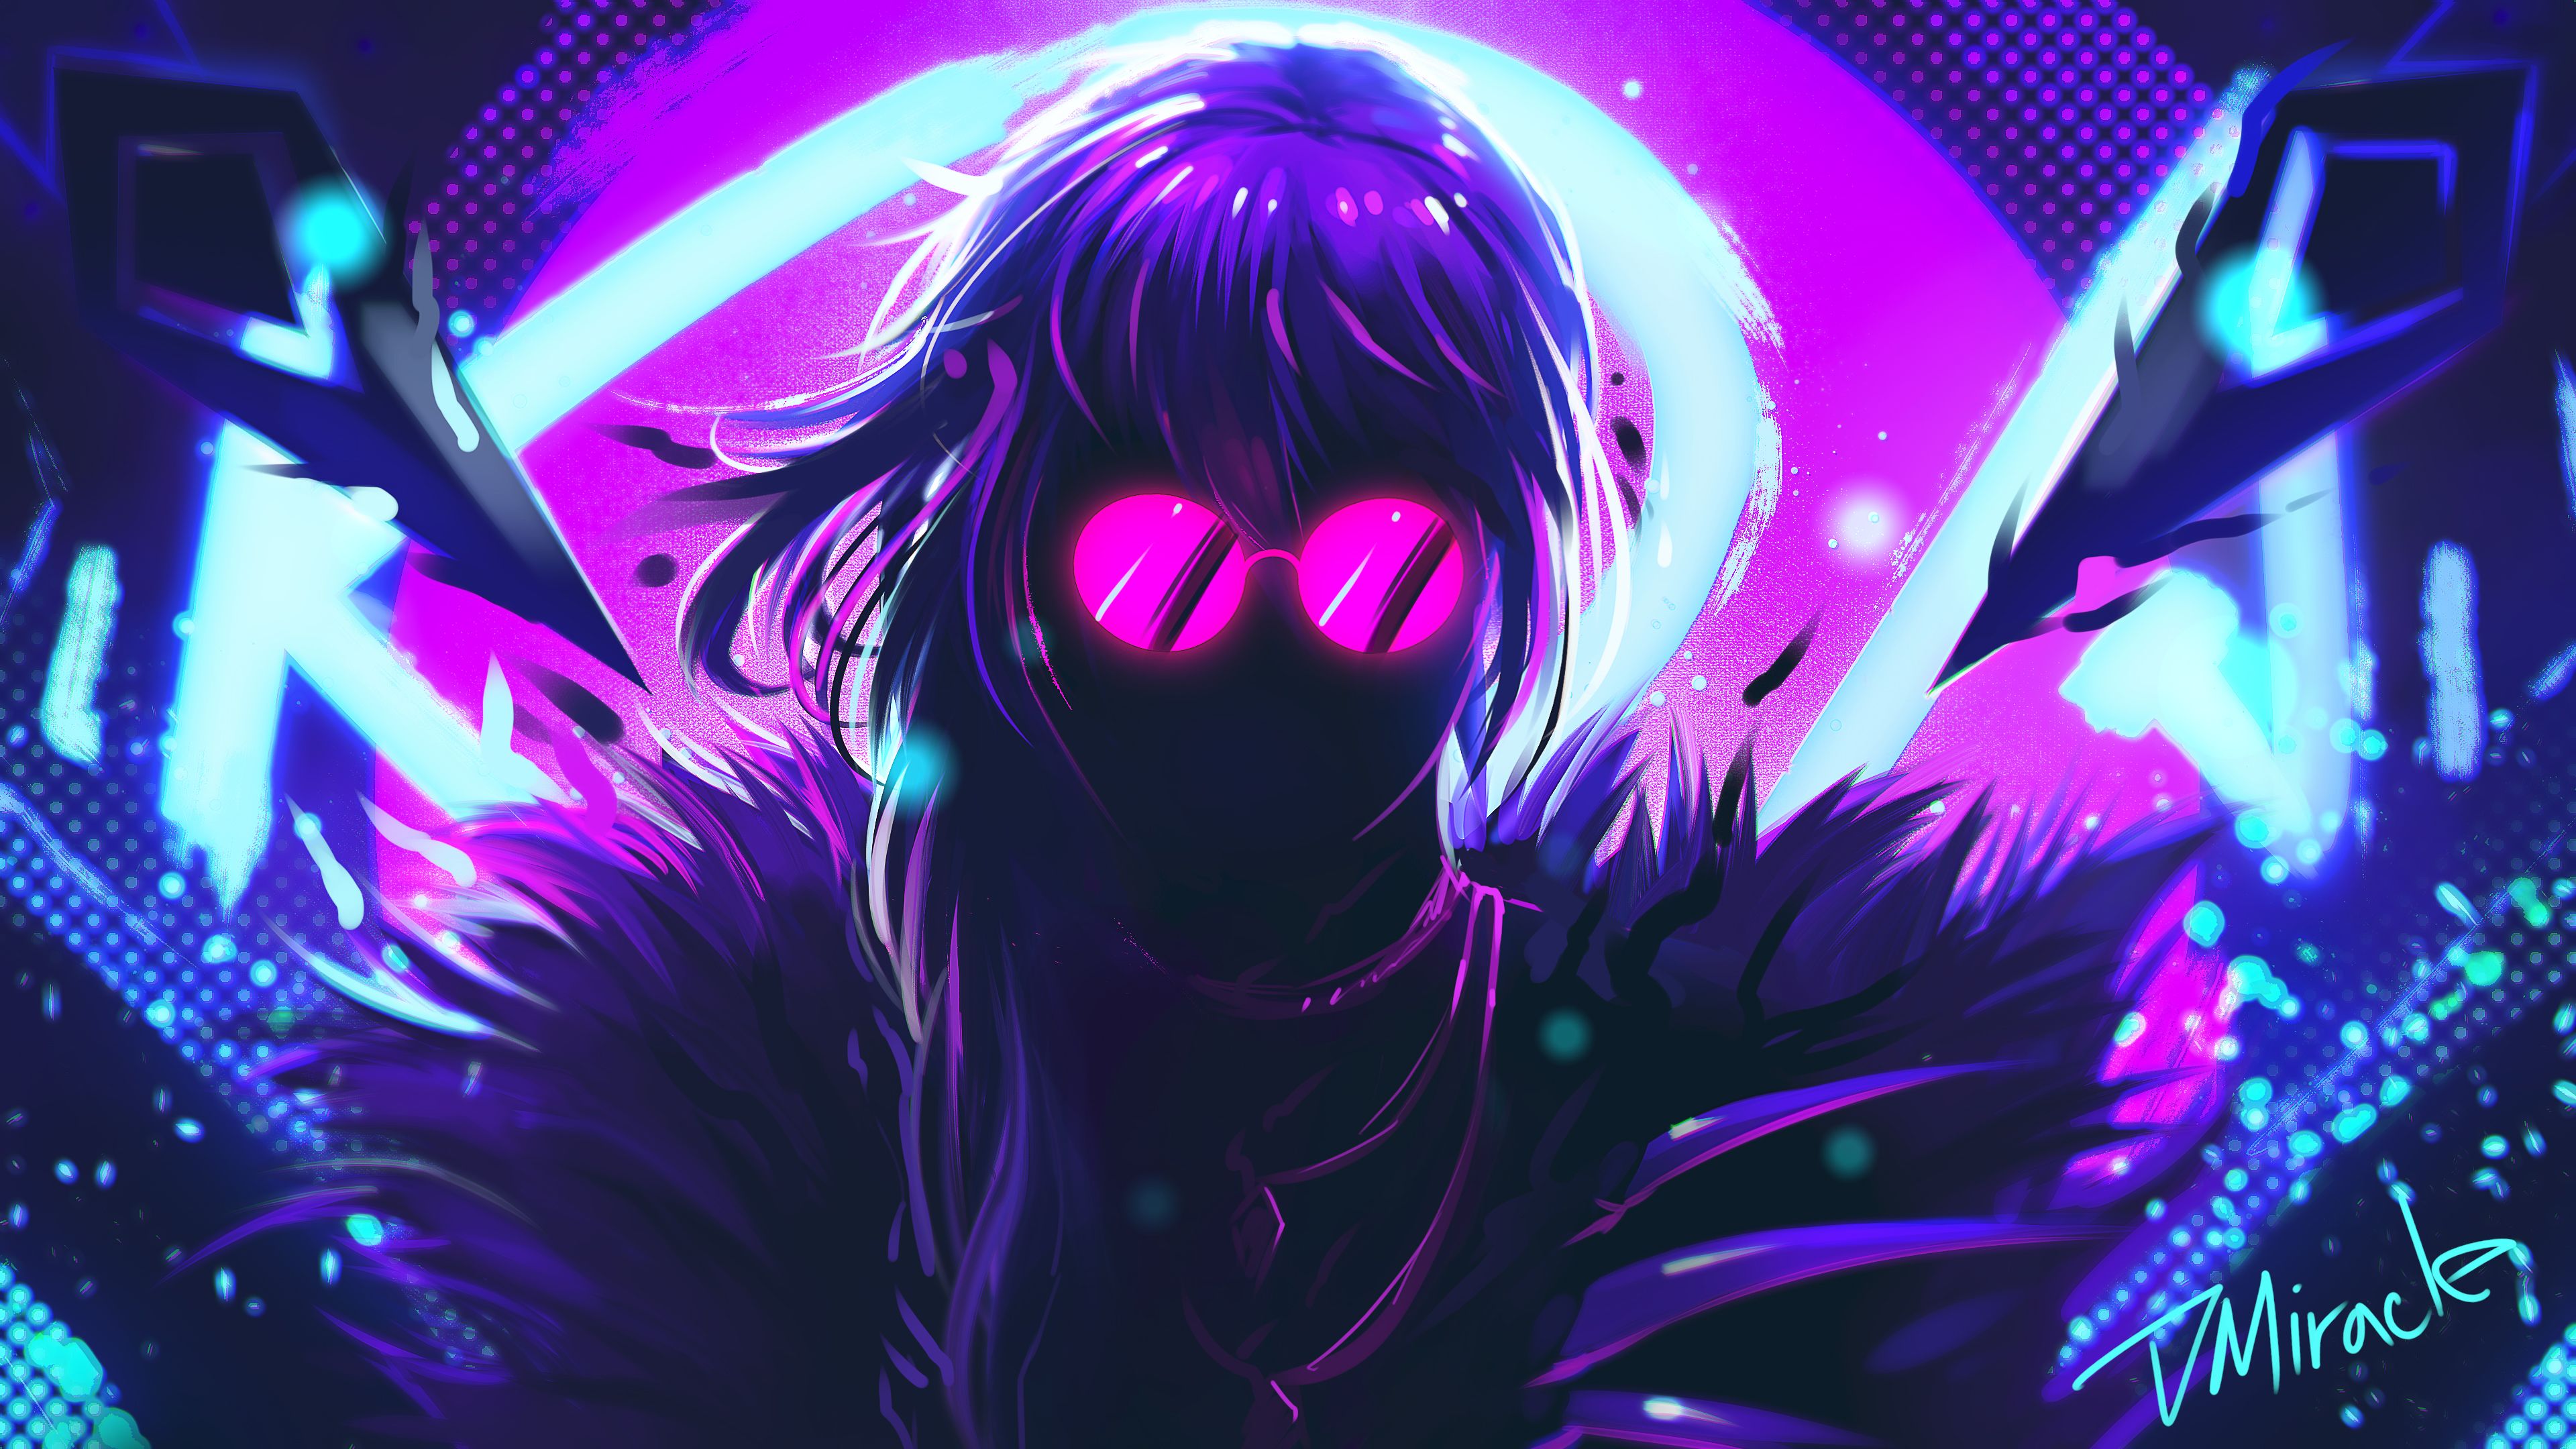 Wallpaper KDA Eve, Neon art, 4K, Creative Graphics / Editor's Picks,. Wallpaper for iPhone, Android, Mobile and Desktop